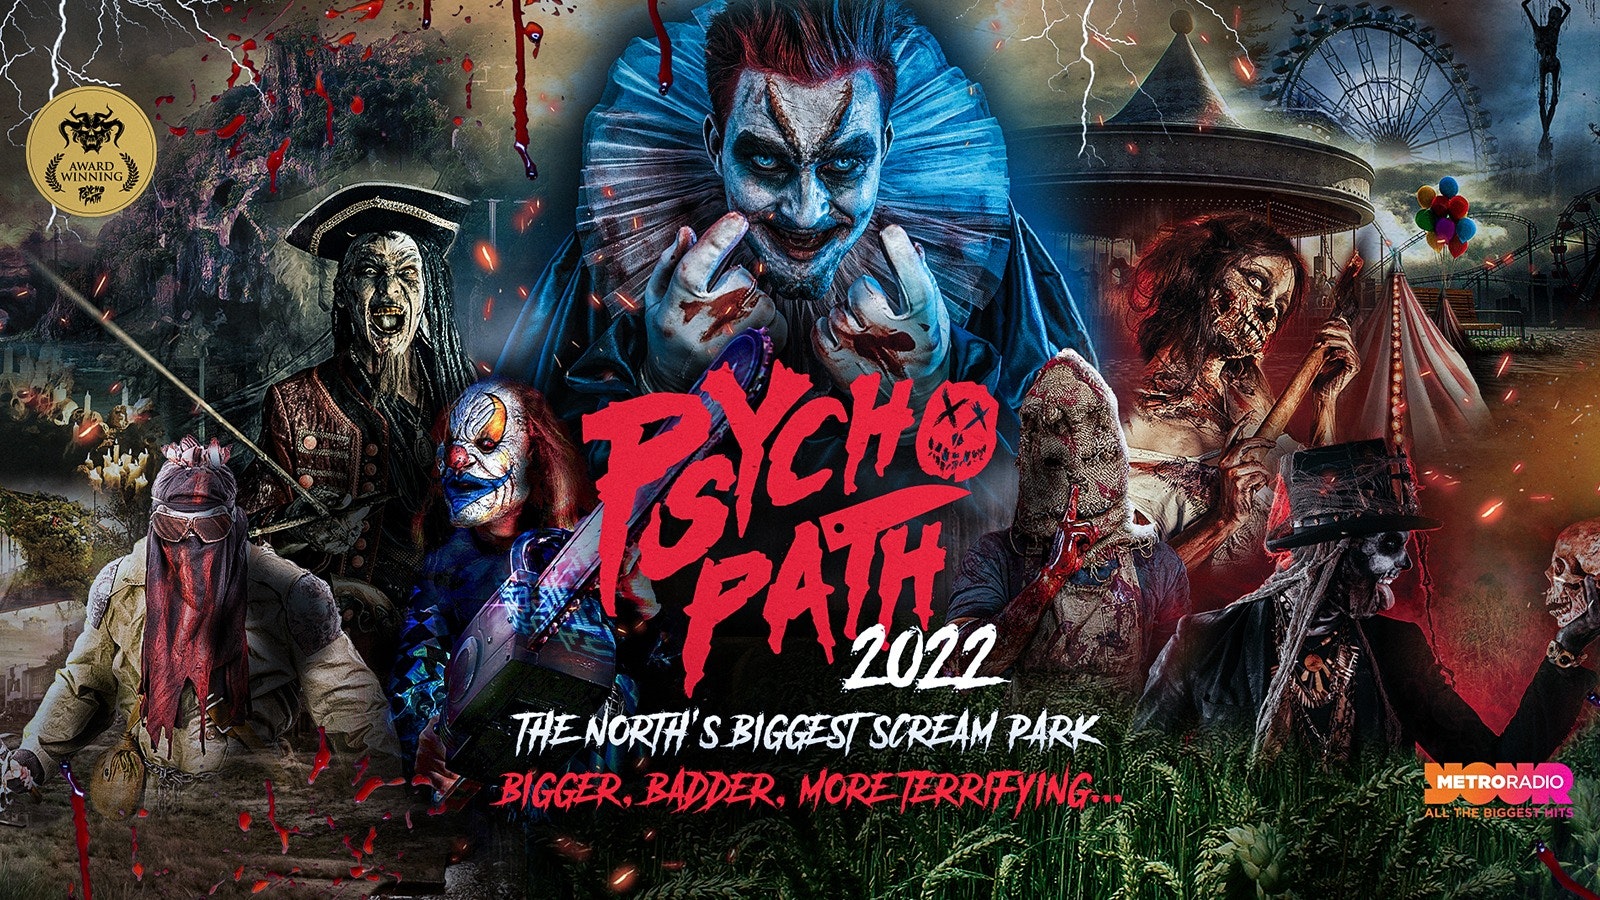 Psycho Path Presents FearGround – Oct 21st